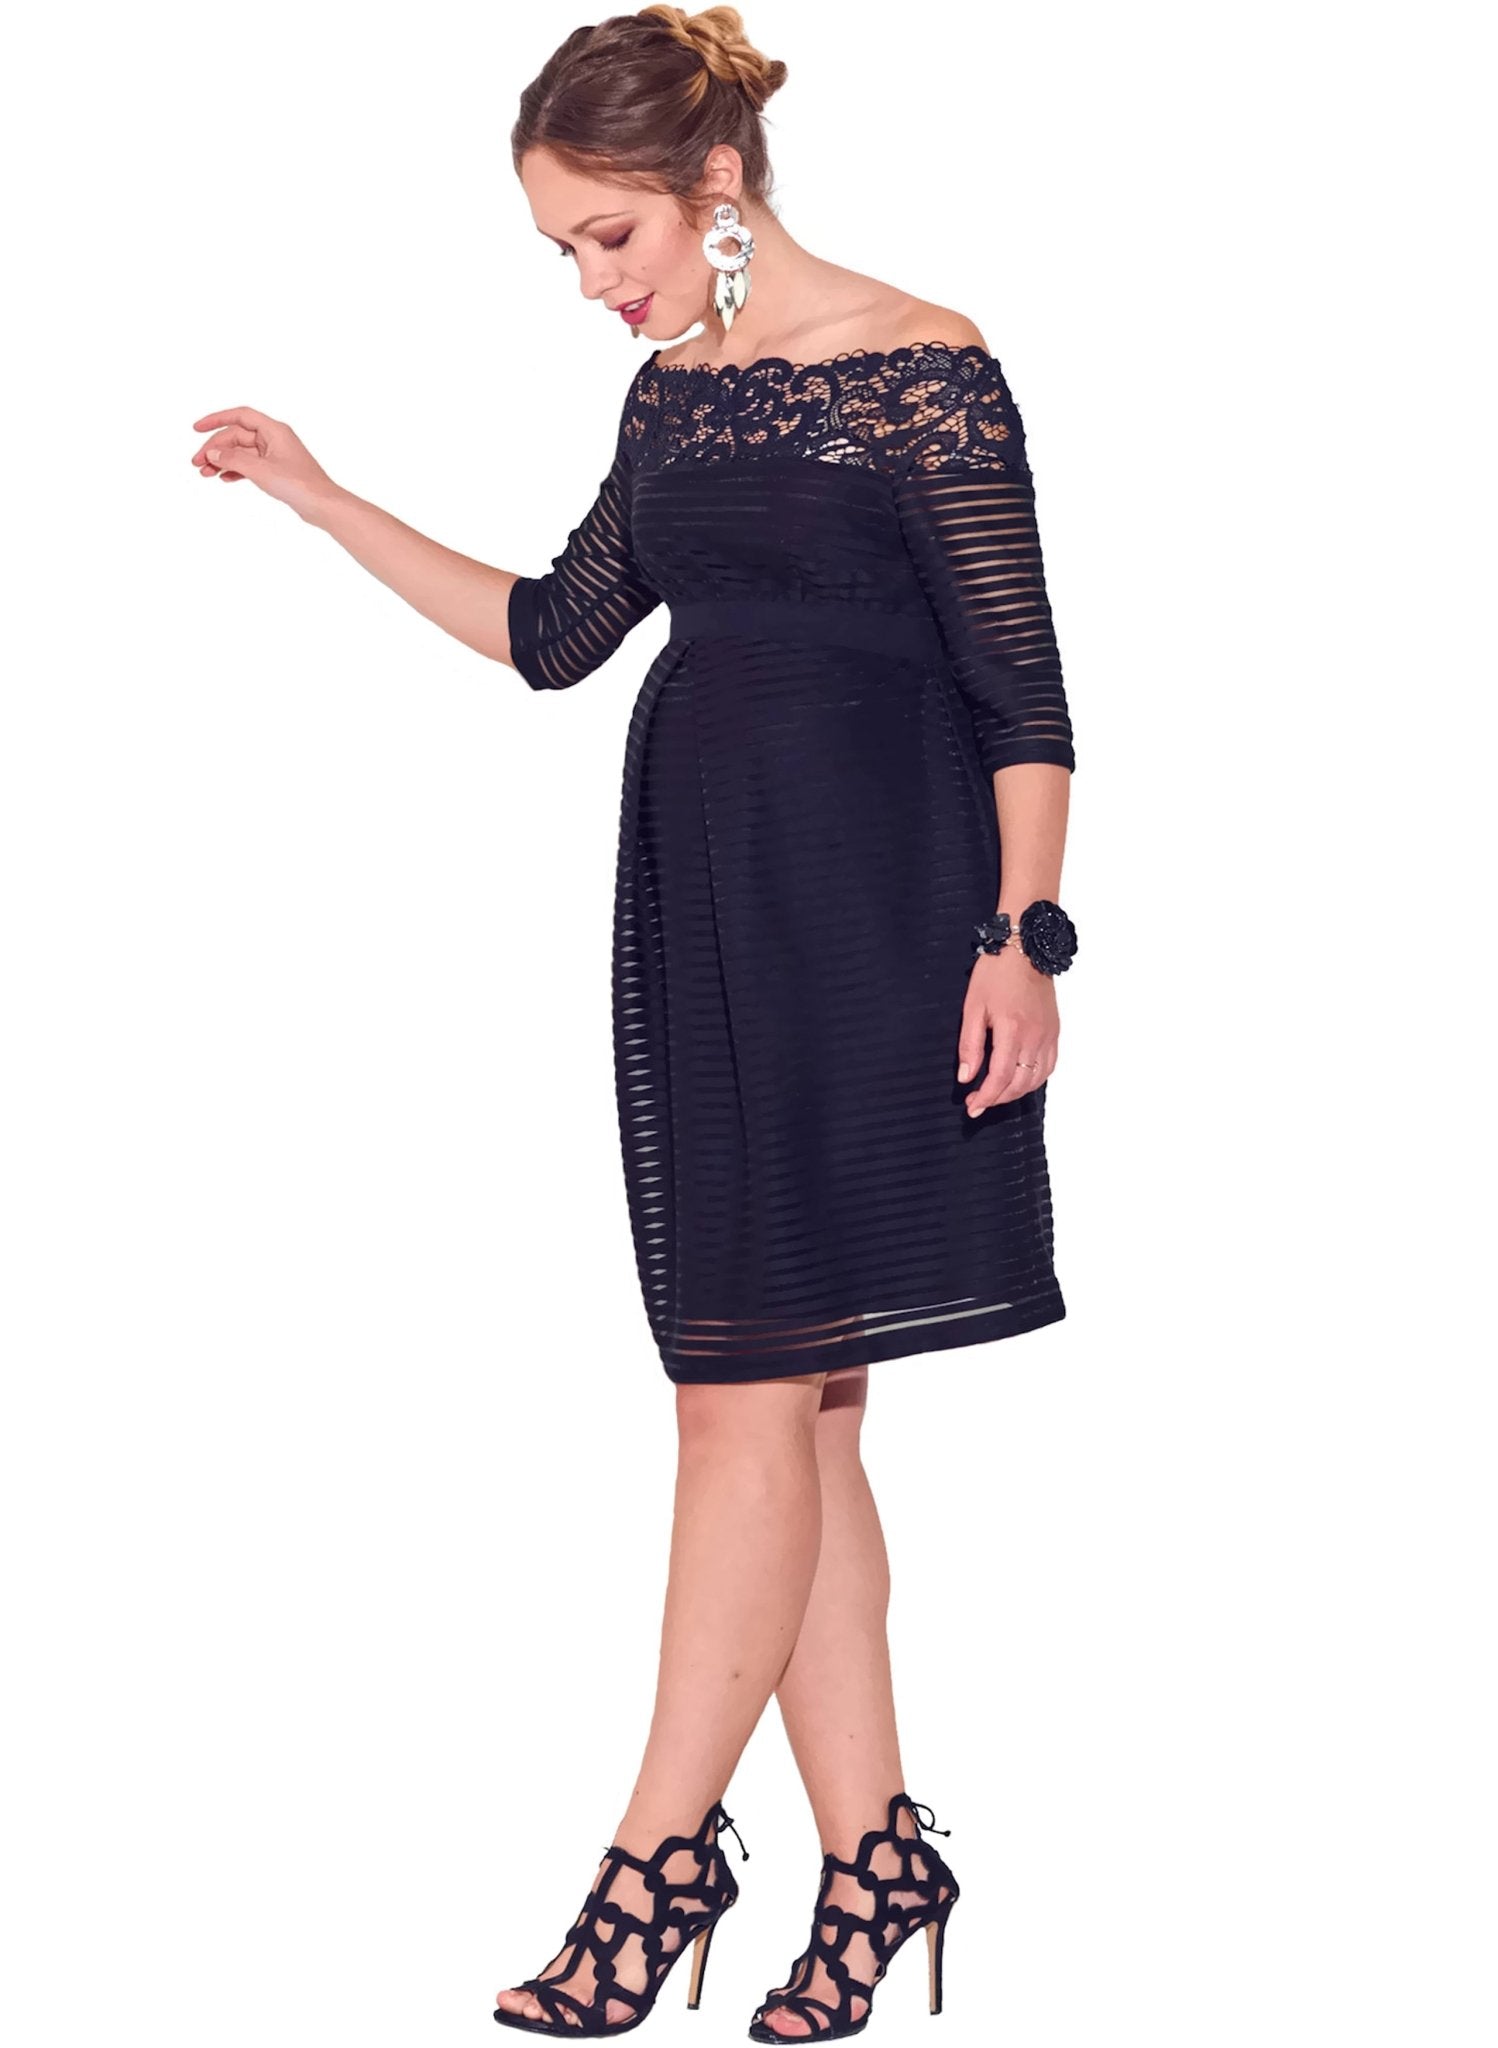 Lace Off Shoulder Maternity Dress - Mums and Bumps